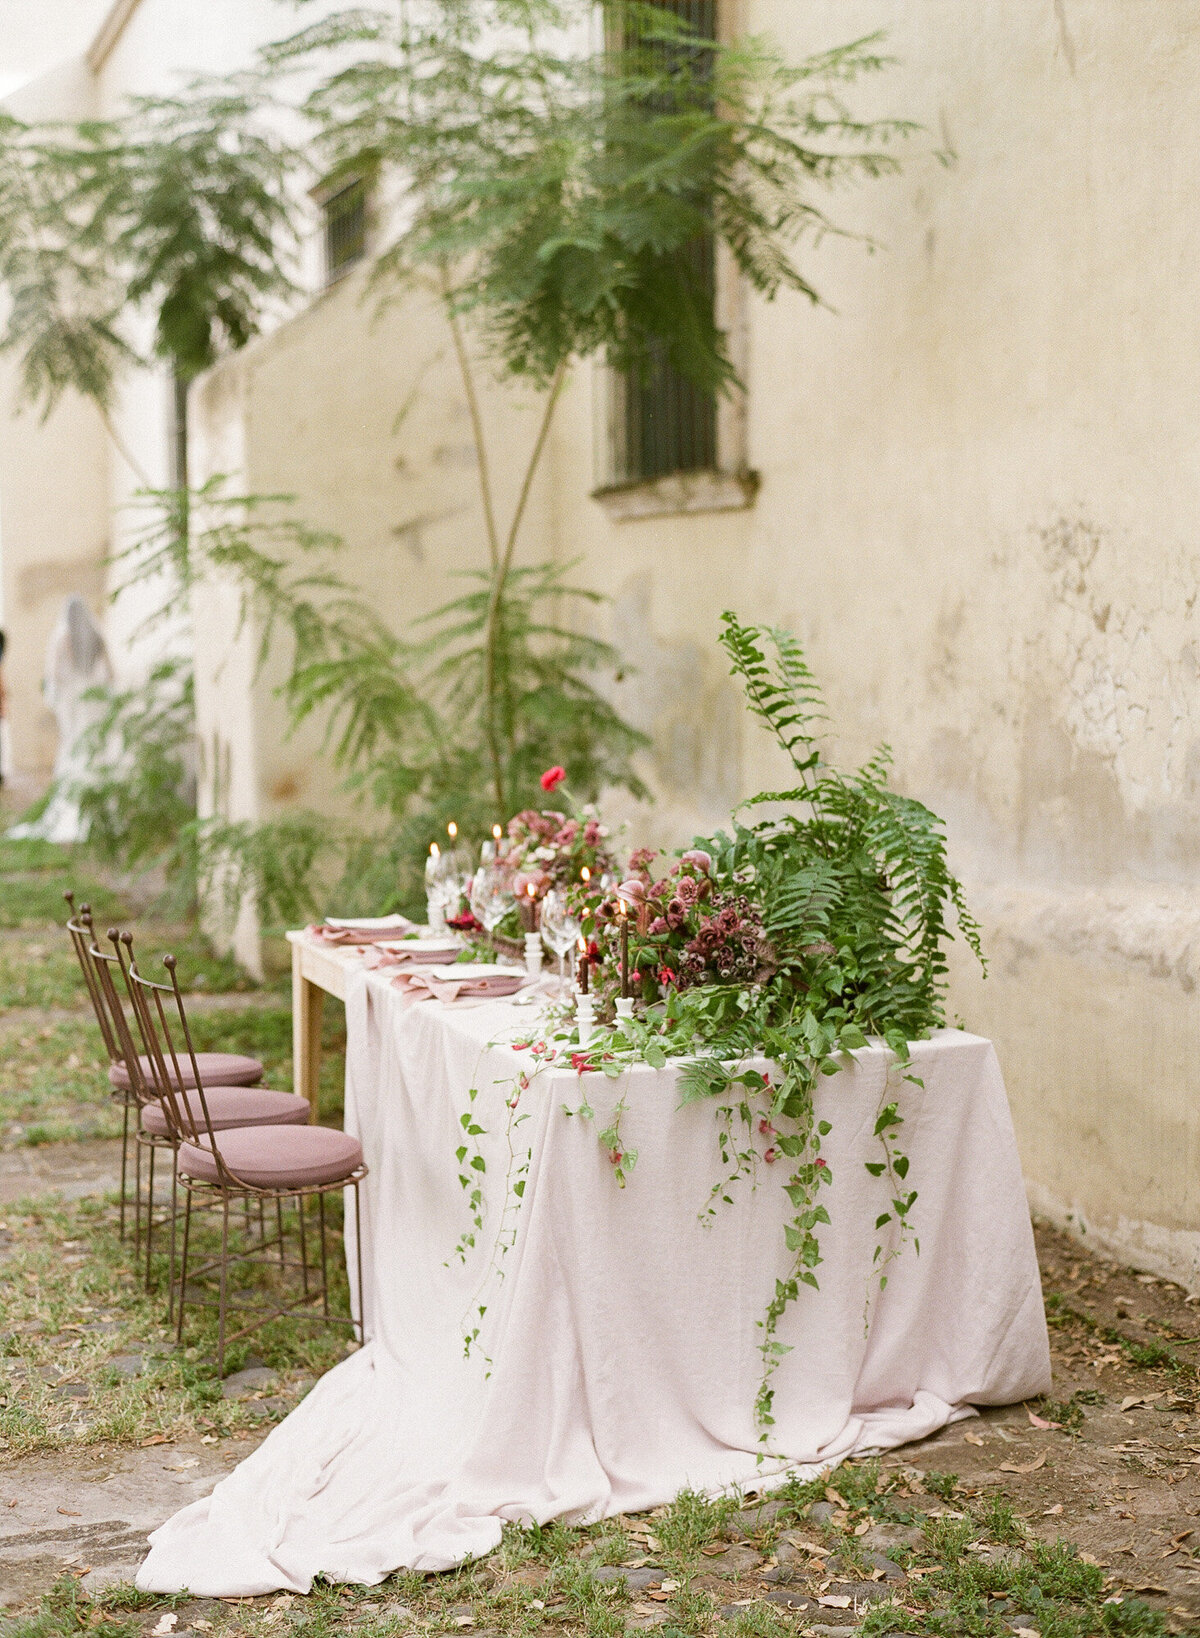 Nature-themed table decoration with white tablecloth.